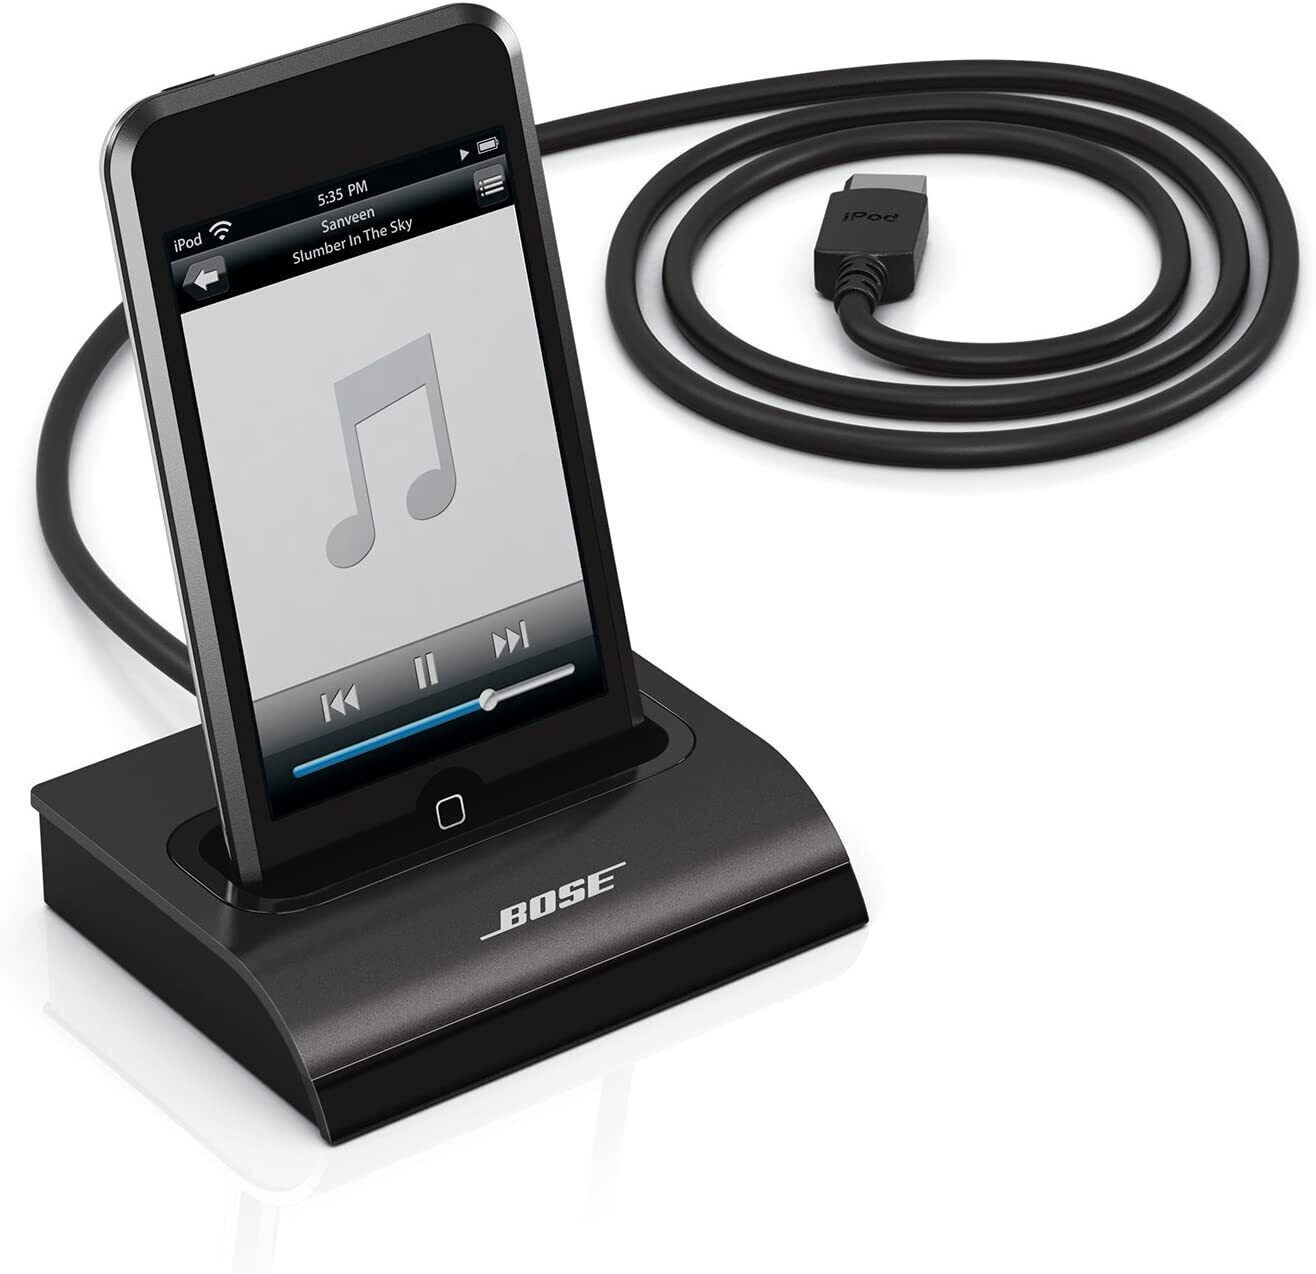 Bose Lifestyle V35 Dock for iPod or iPhone